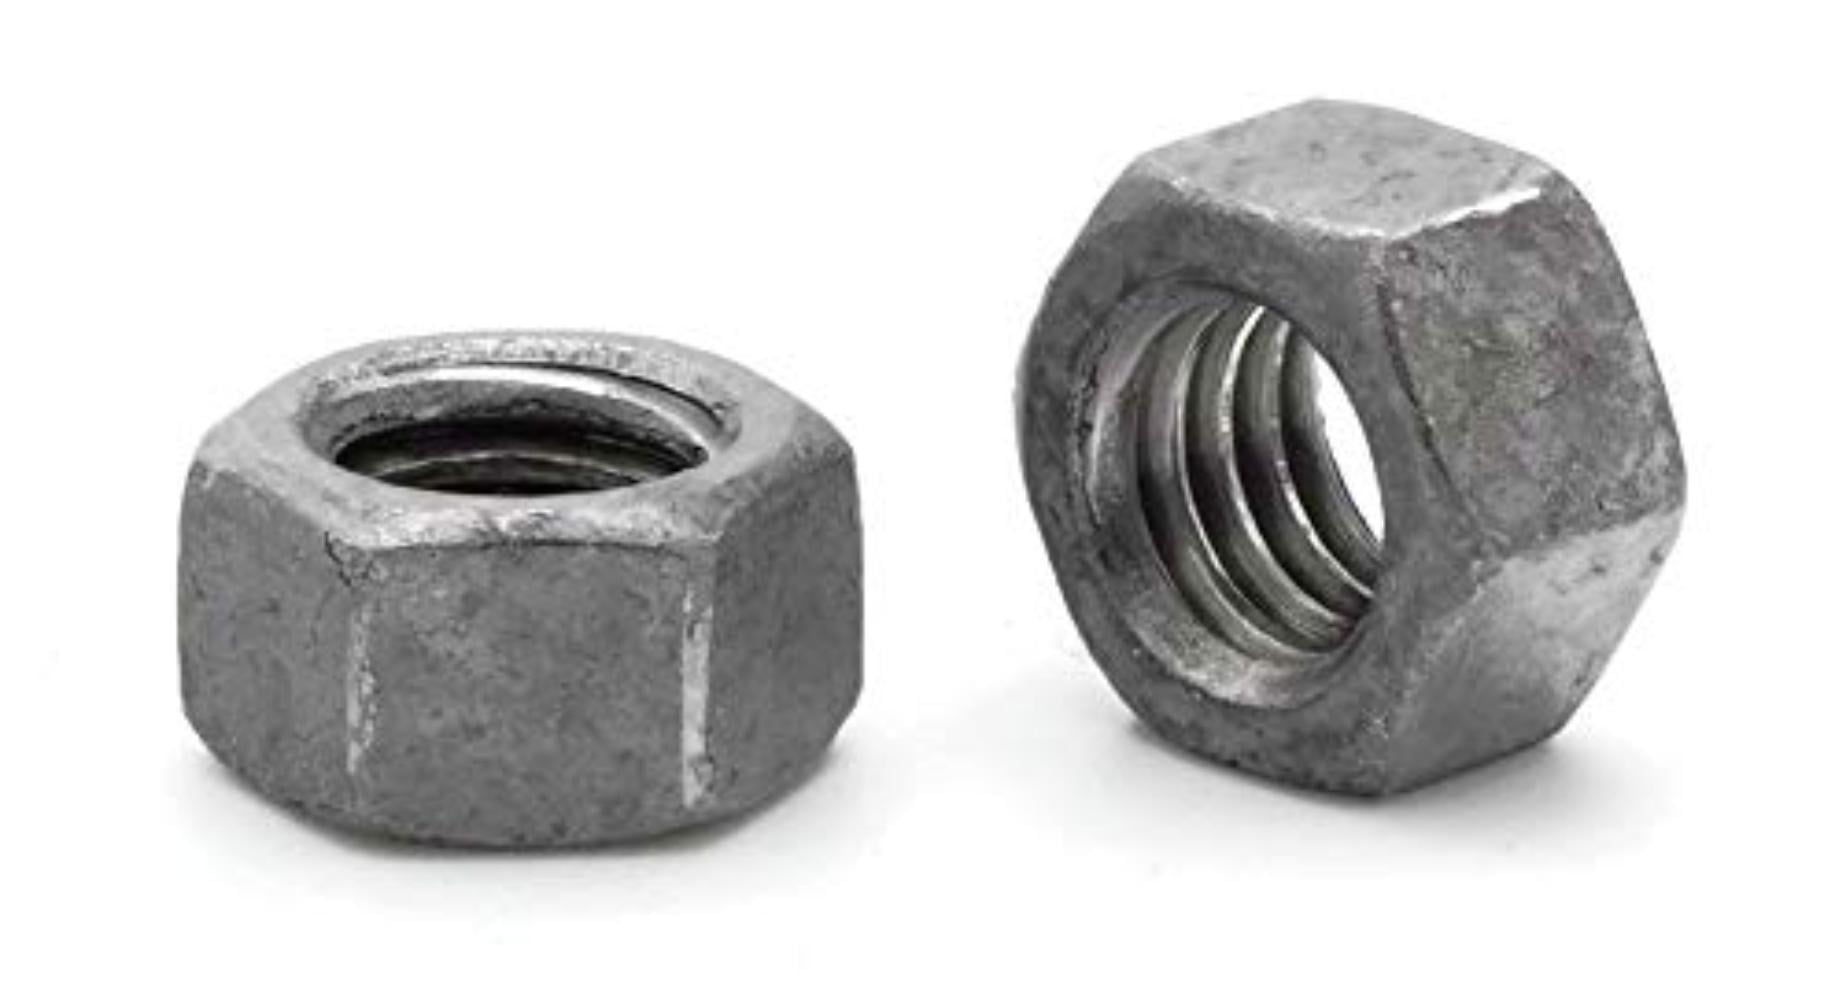 100 5/8-11 Hot Dipped Galvanized Finish Hex Nut 